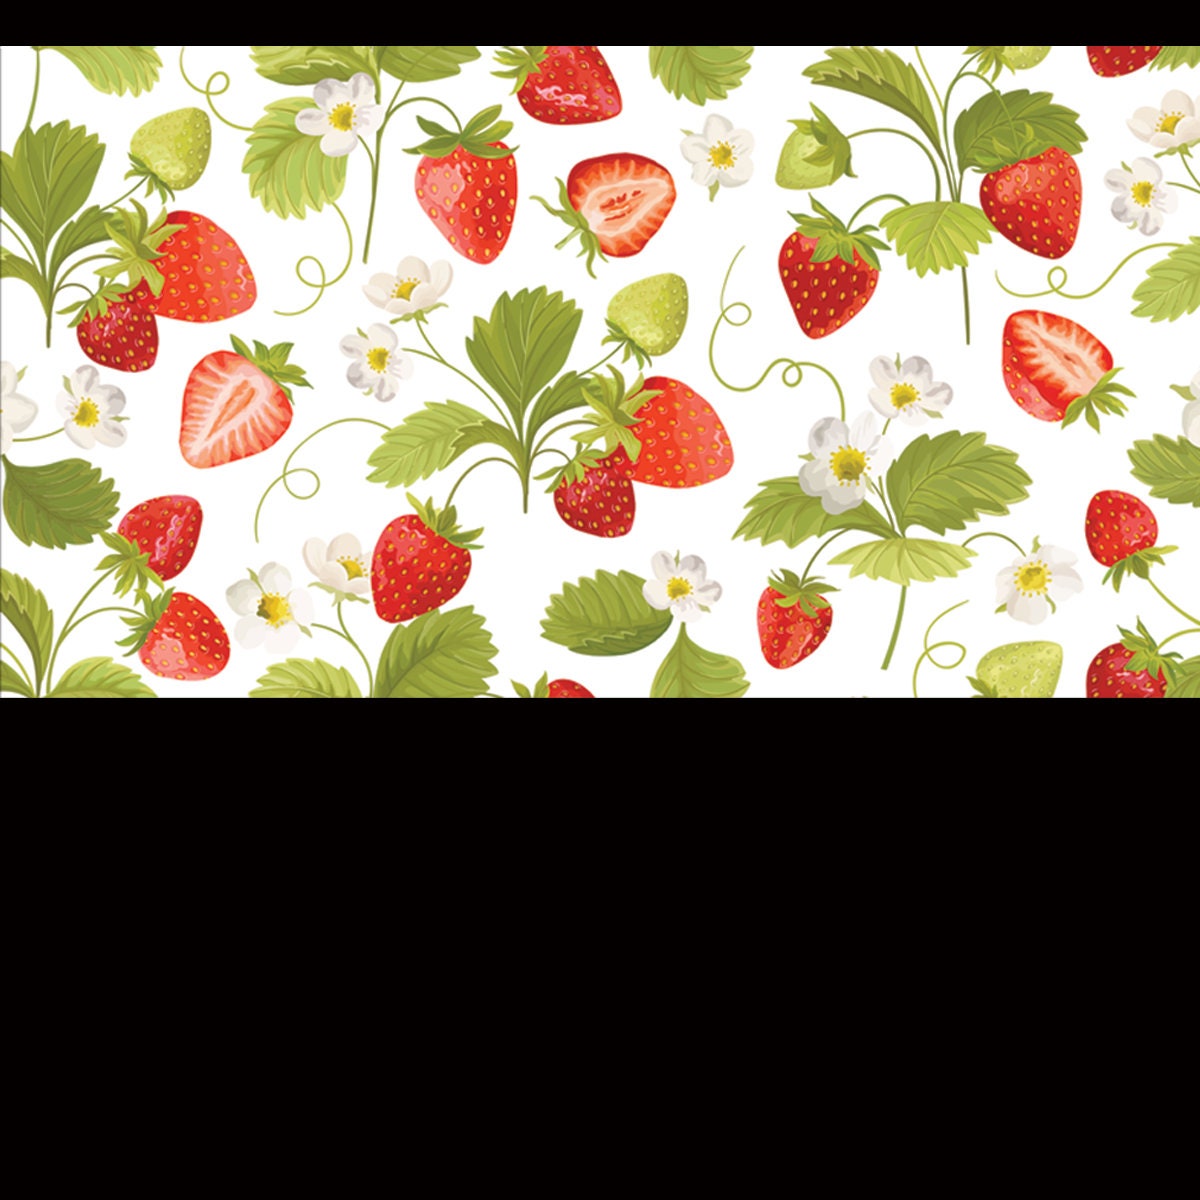 Strawberry Background with Flowers, Wild Berries, Leaves Wallpaper Kitchen Mural